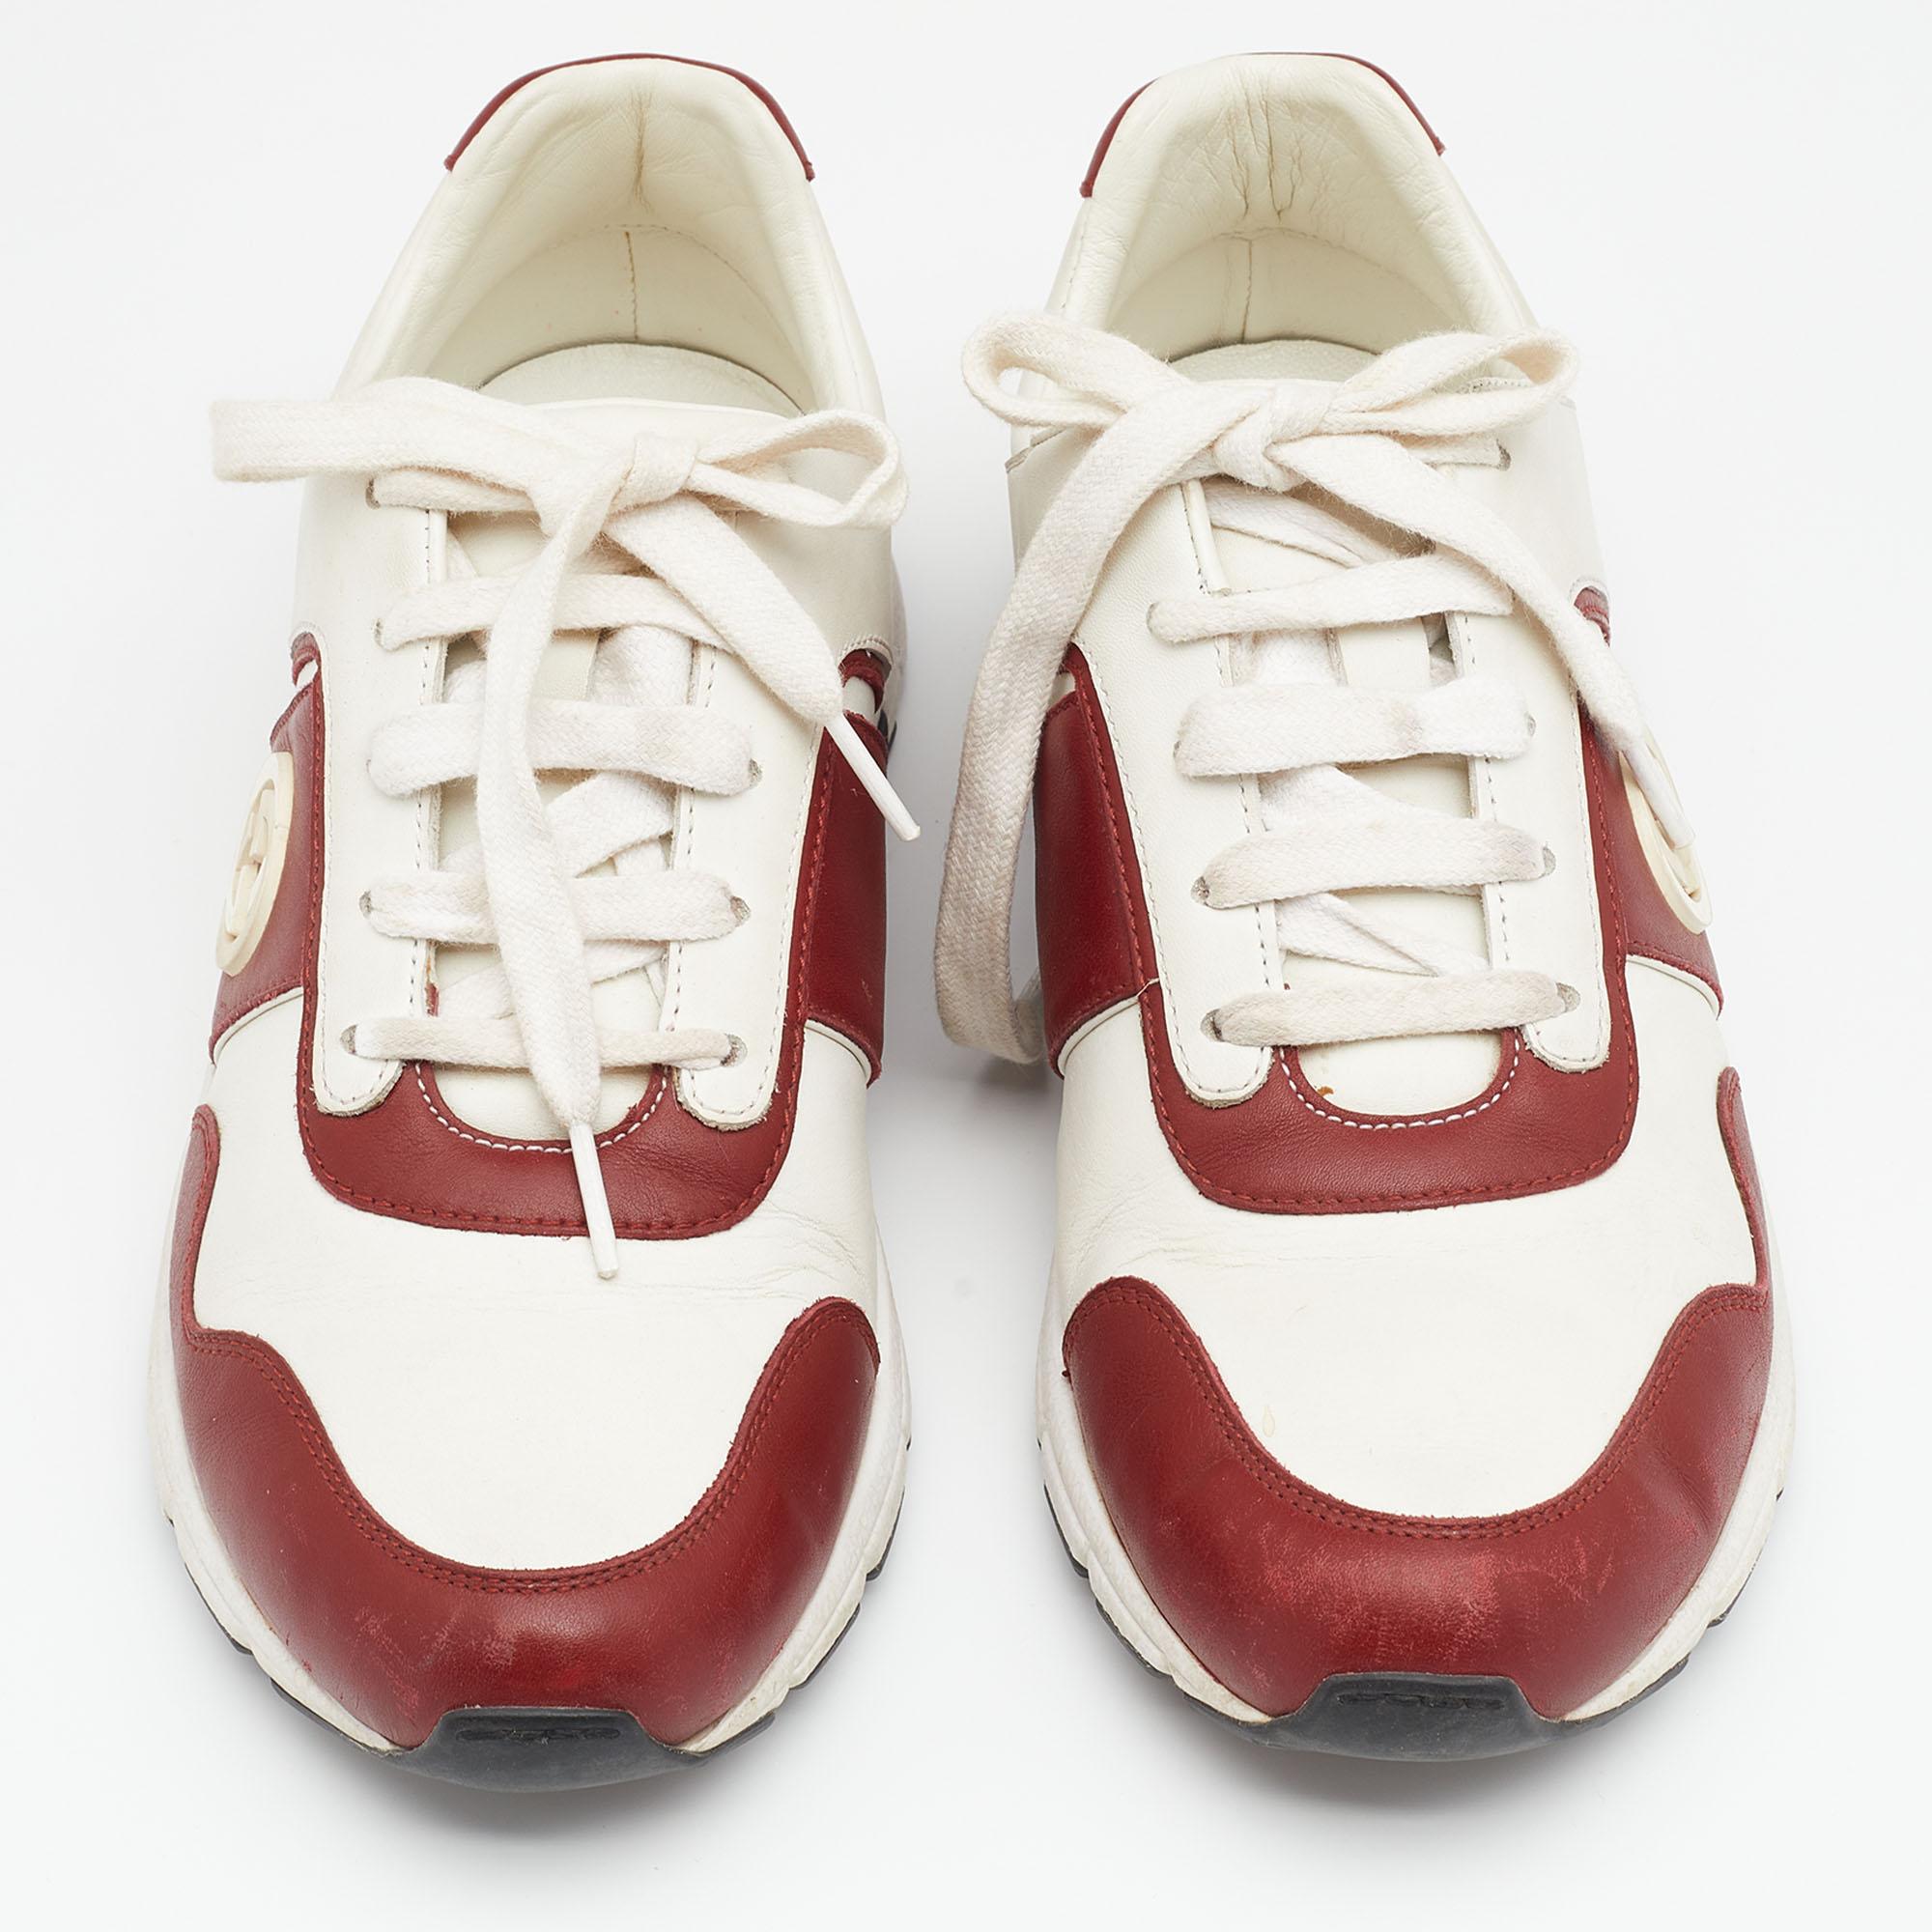 Designed into a chunky size, these Gucci sneakers are not just stylish in appeal but also comfortable to wear. Crafted from quality materials, they are designed with Interlocking G logos on the sides. Finished off with laces on the vamps, these